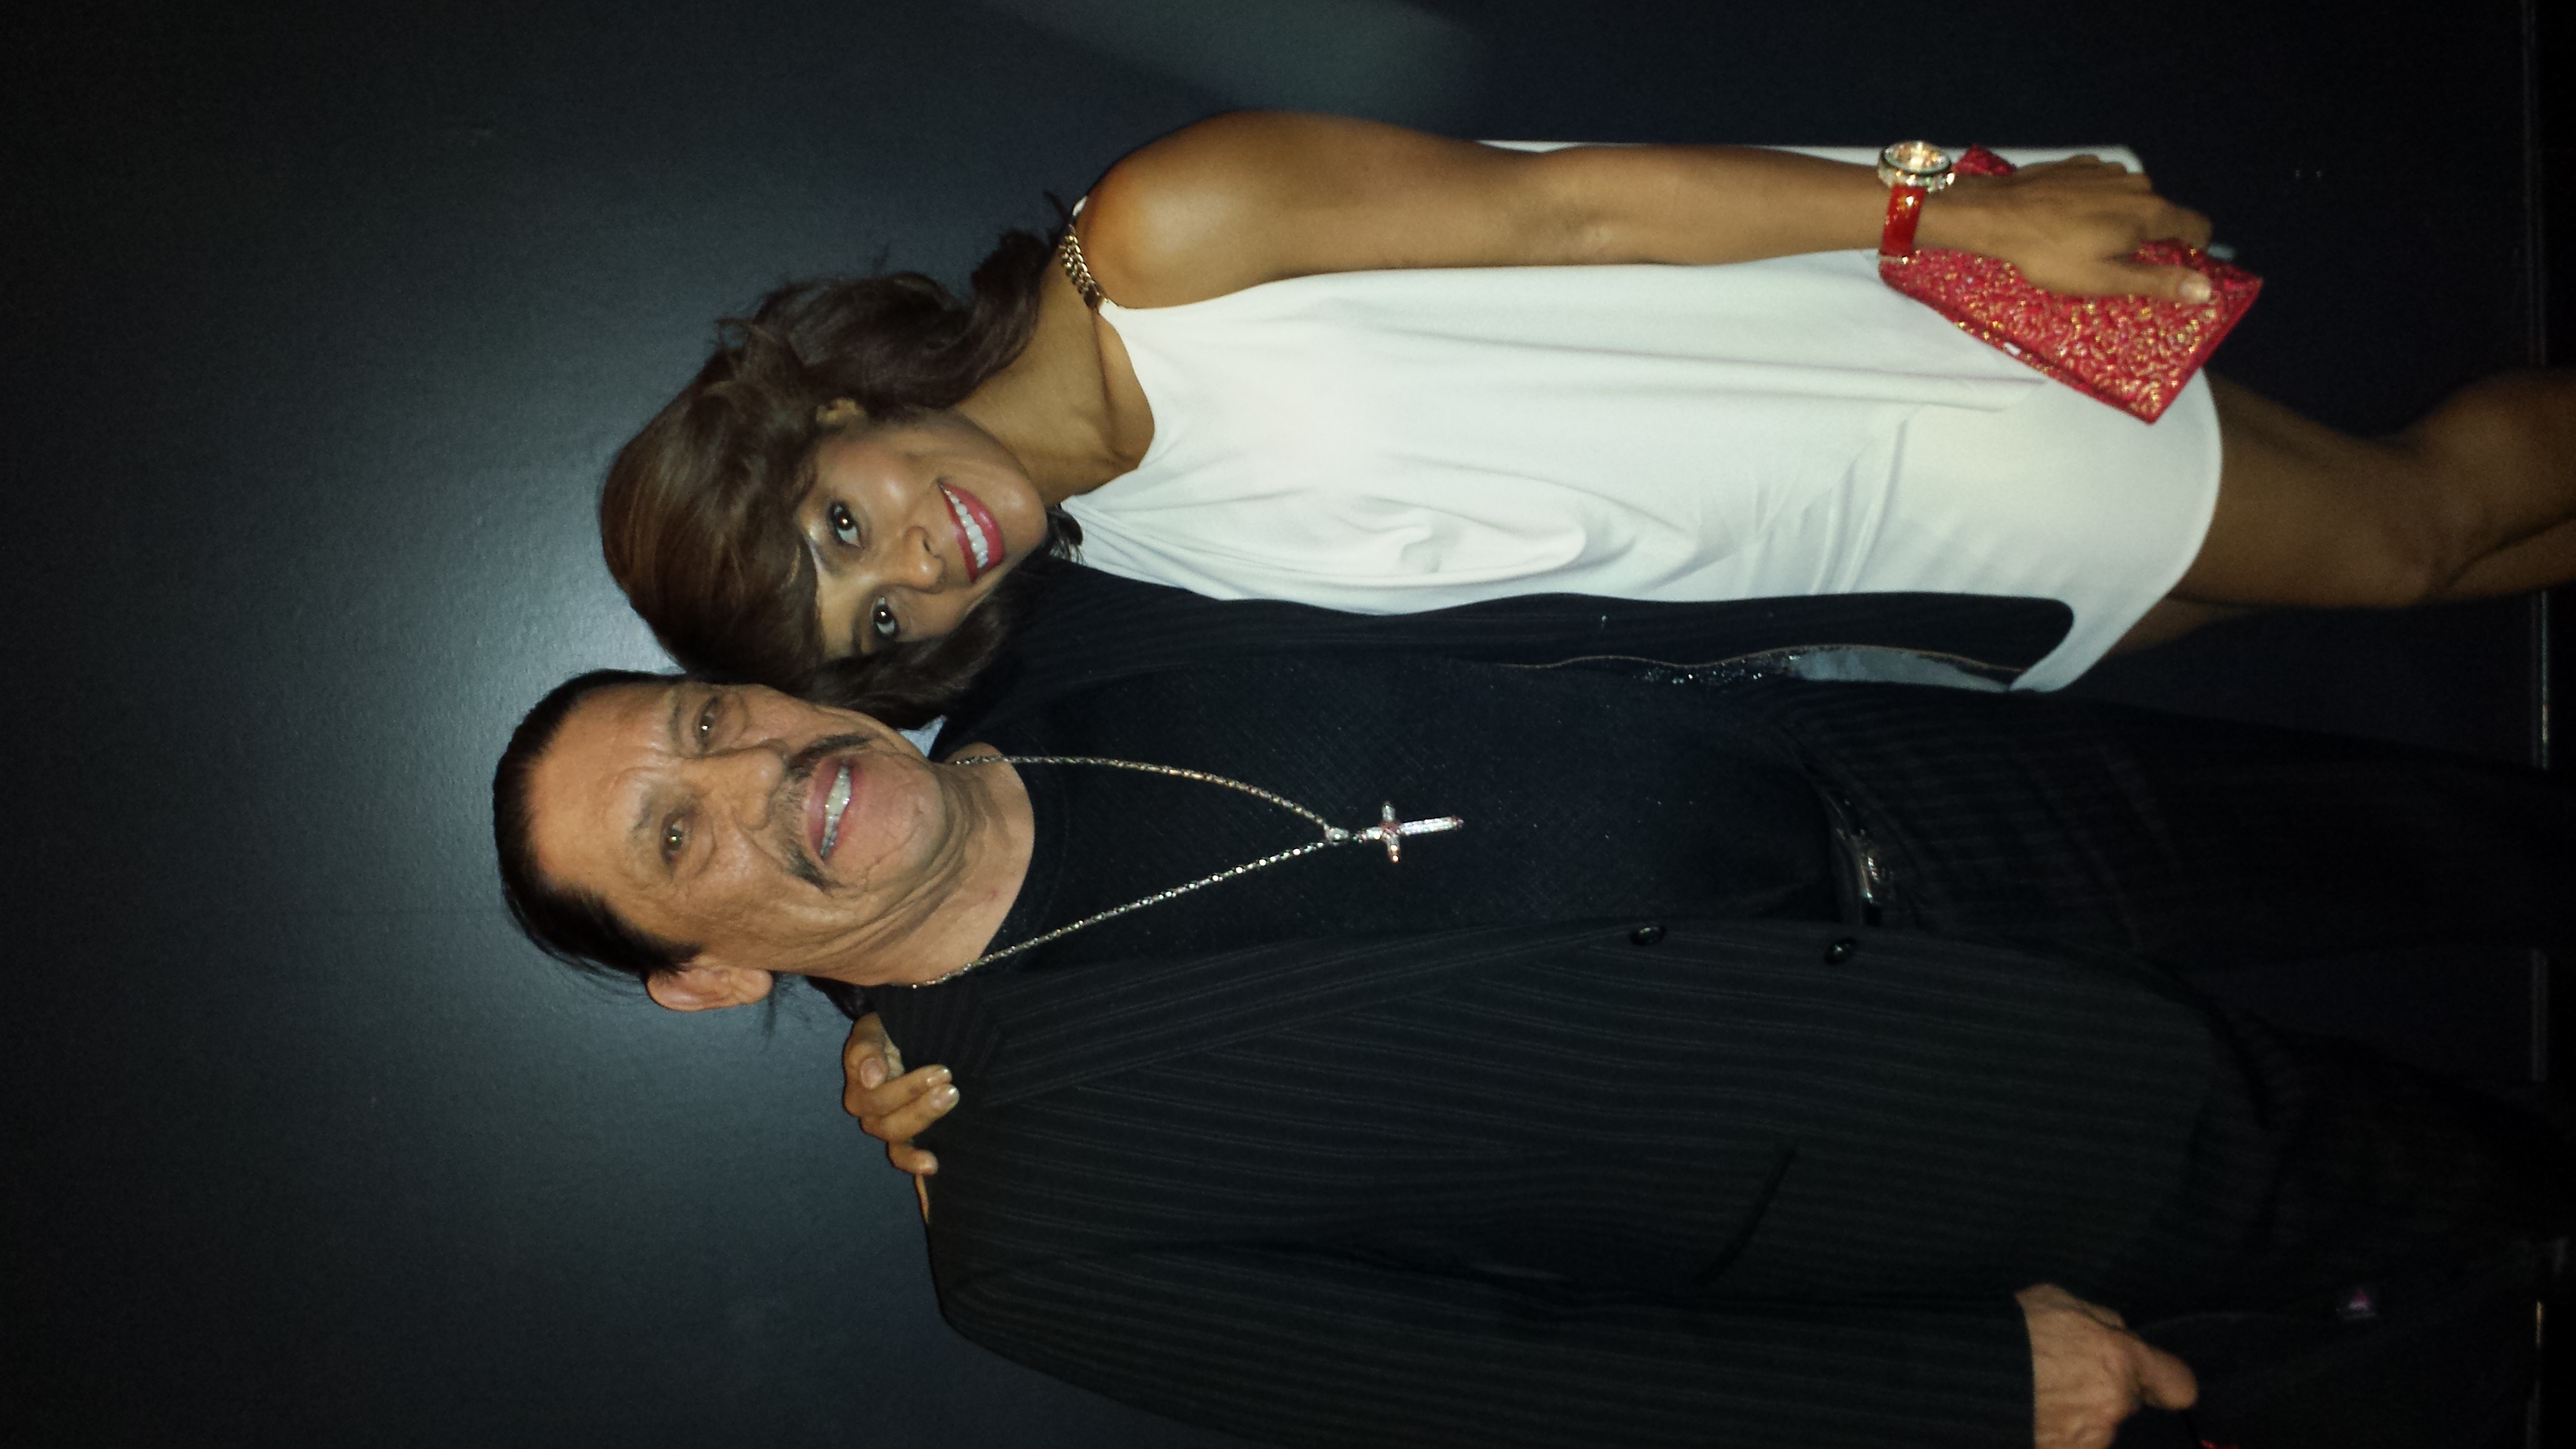 Danny Trejo and Tiffany C. Adams at premiere of 20 FT Below: The Darkness Descending